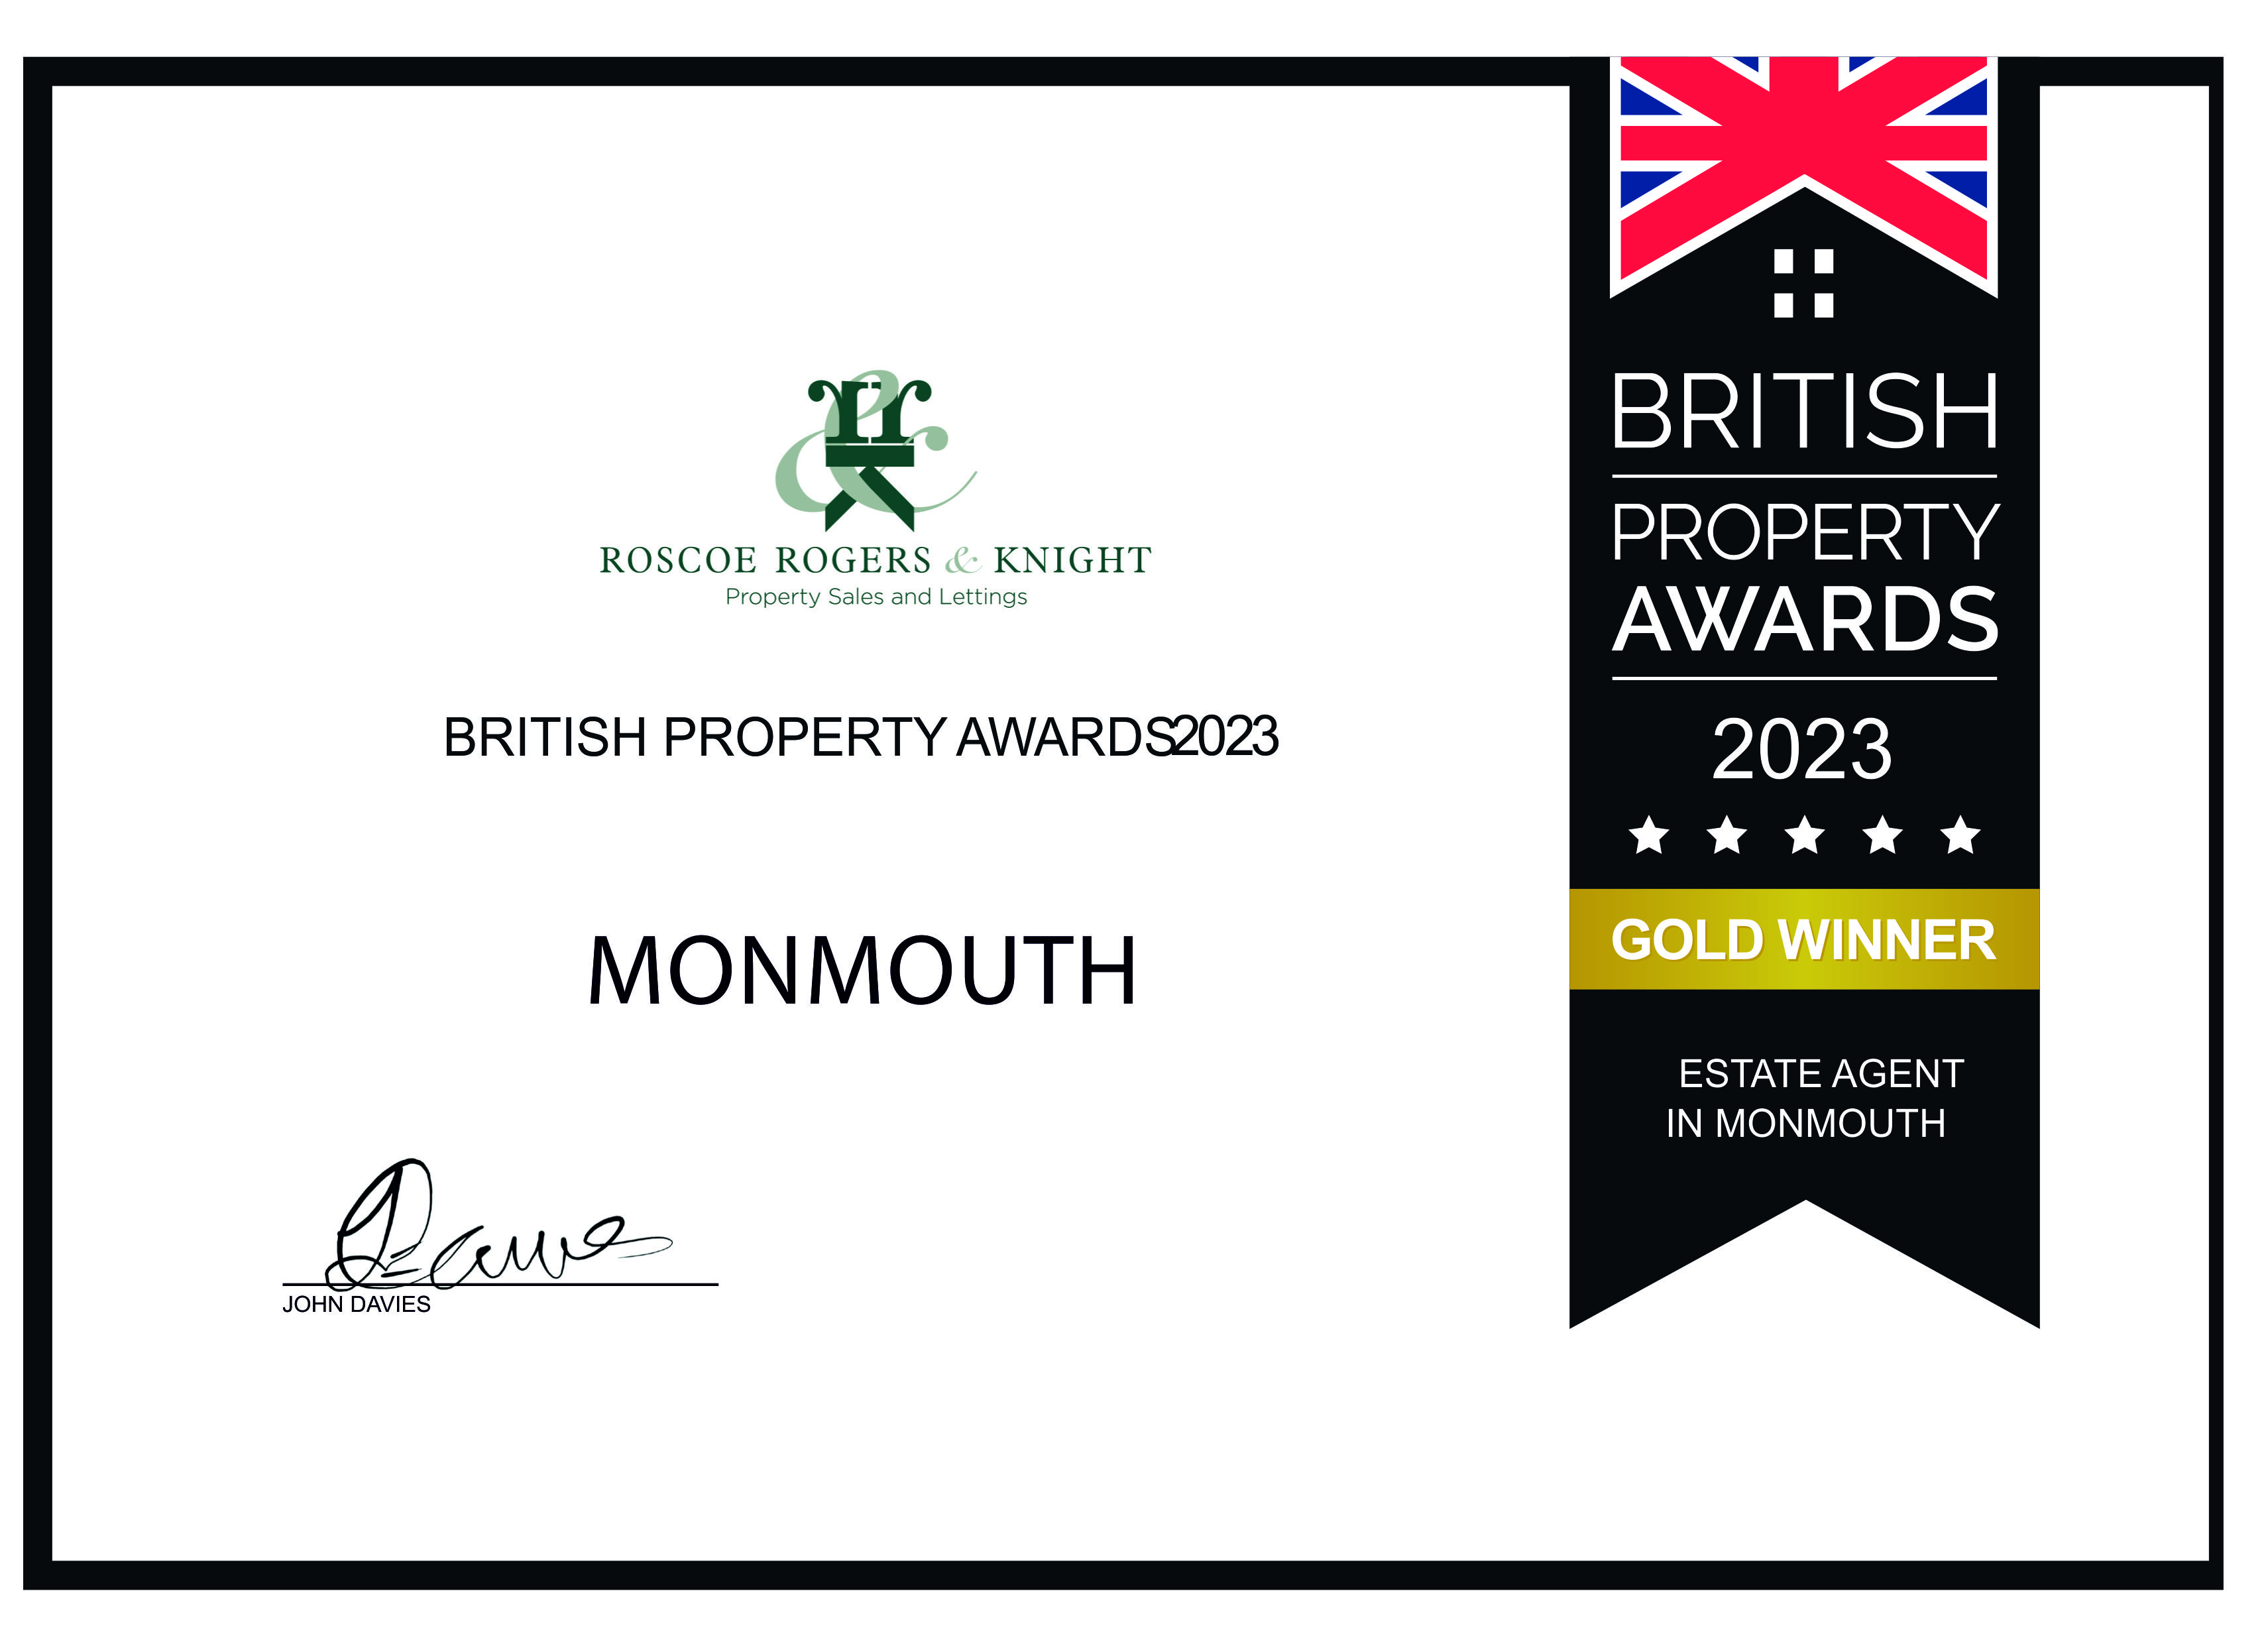 certificate of Gold award for British Property Awards 2023